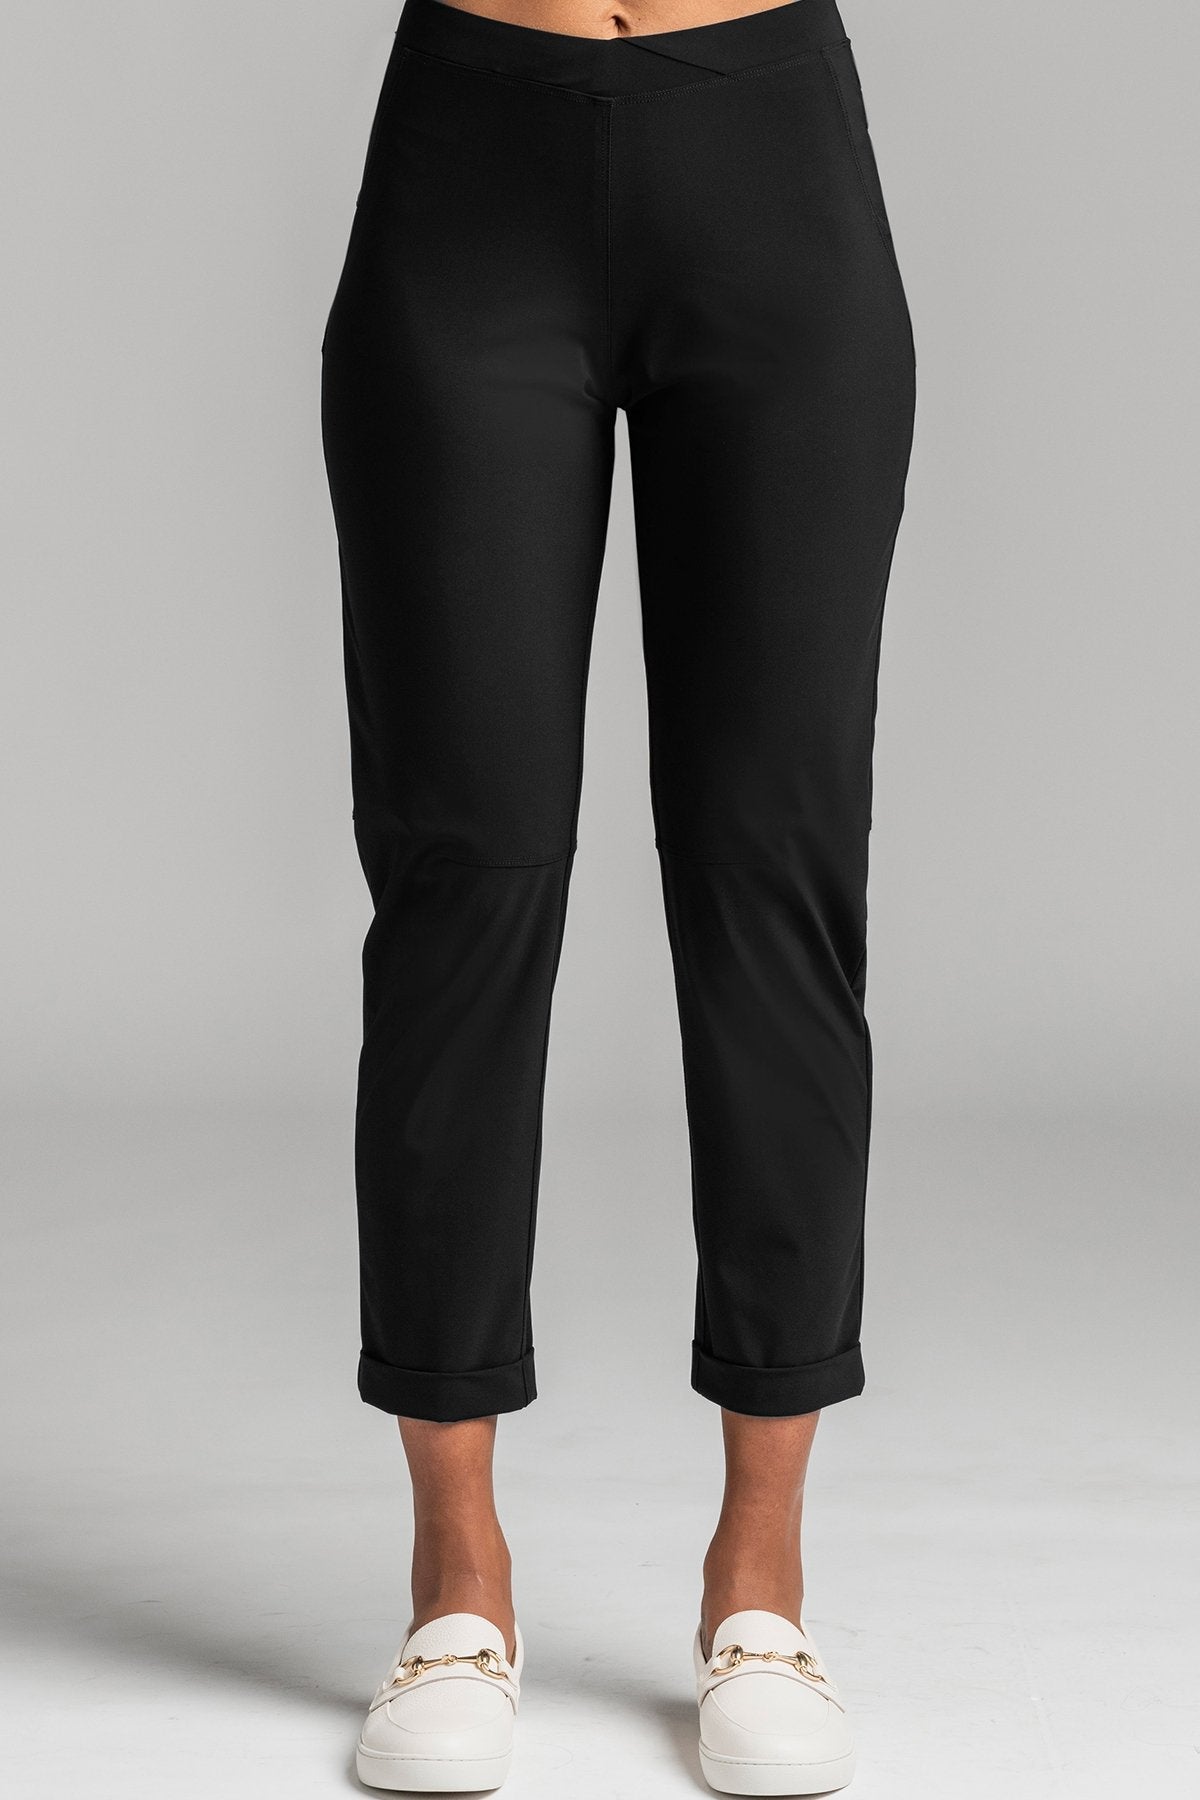 PAULA RYAN ESSENTIALS Waisted Cigarette Pant - Microjersey